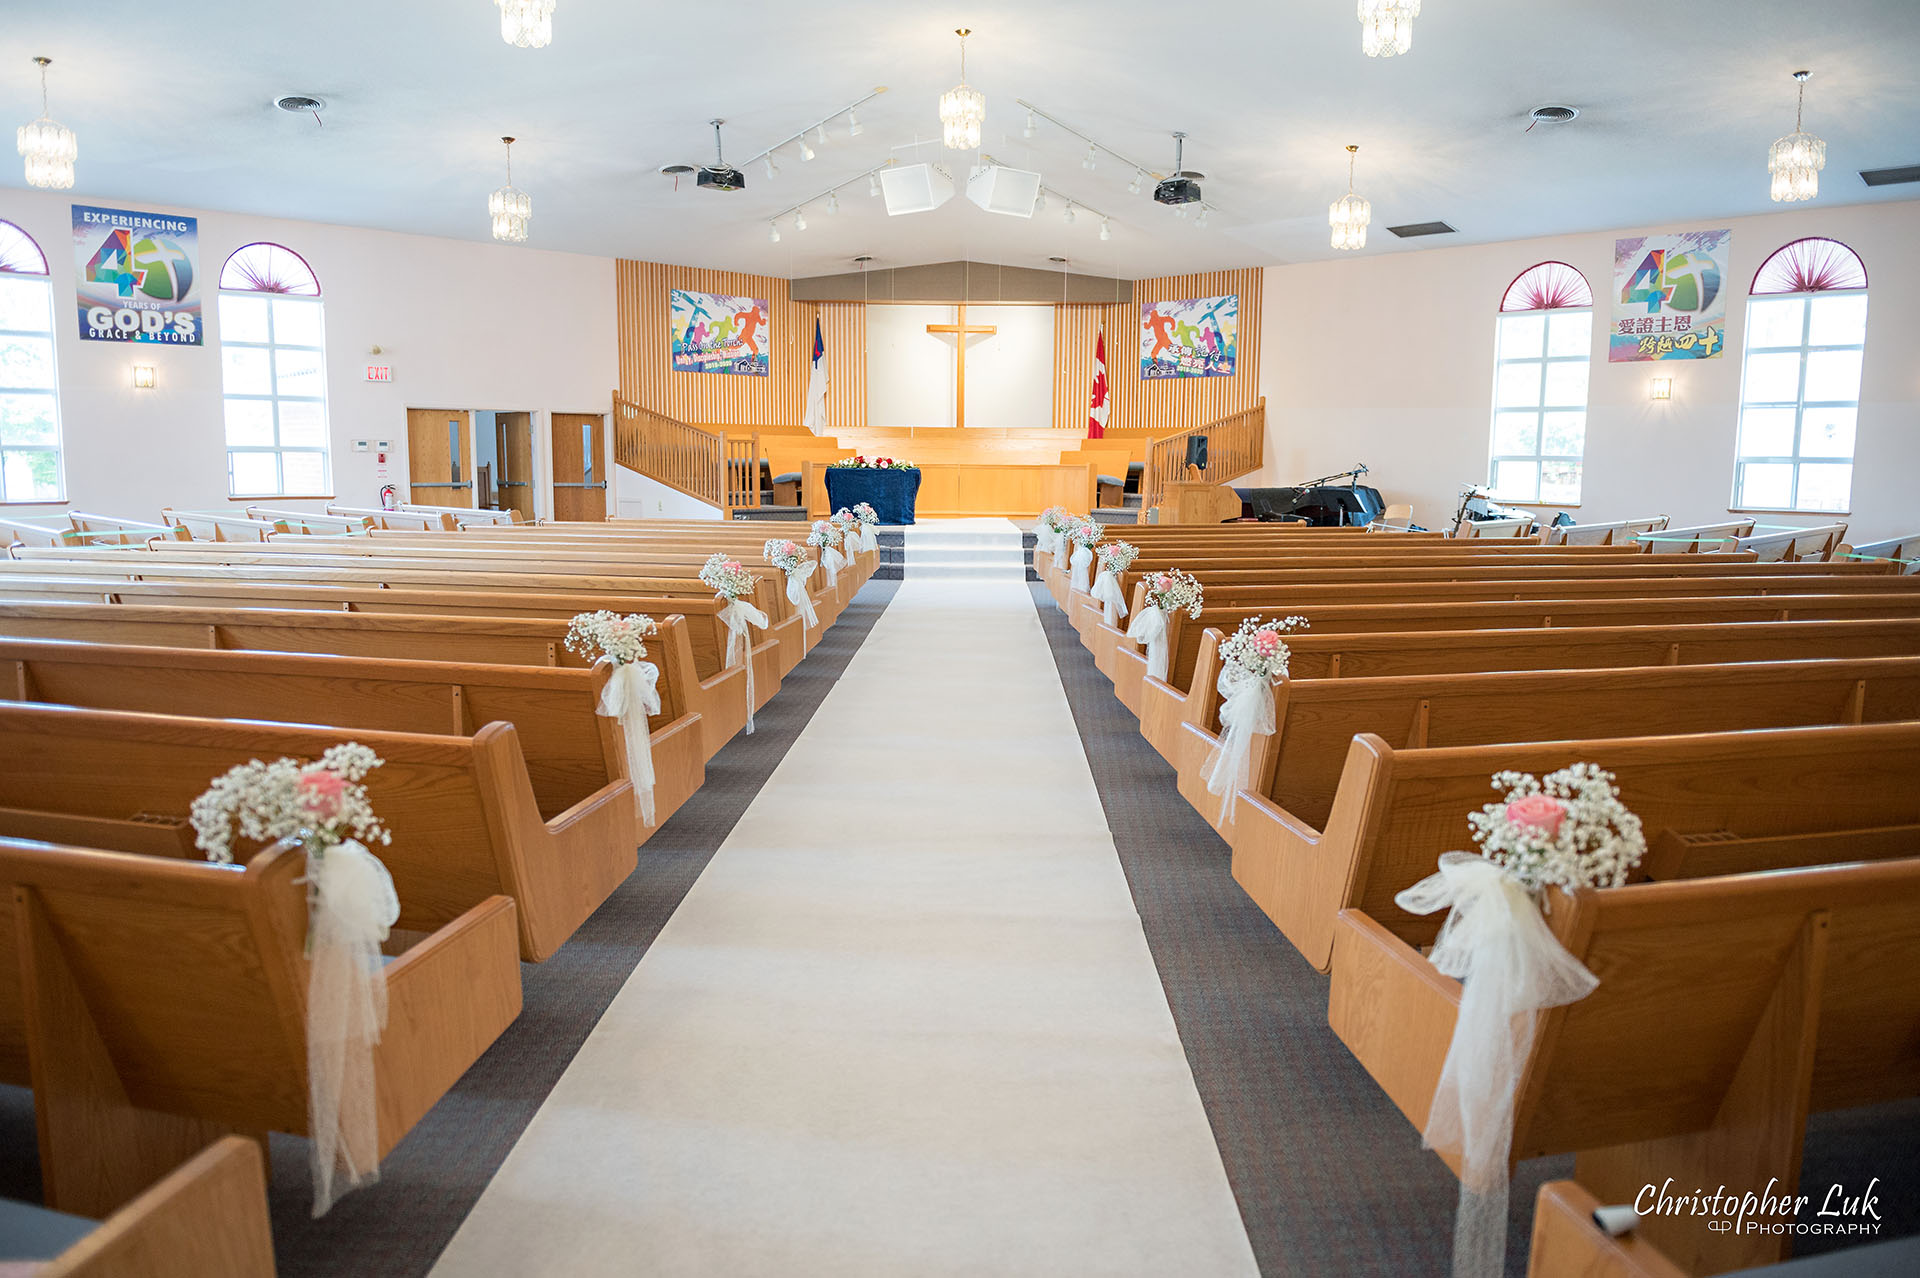 Christopher Luk Toronto Wedding Photographer Bridle Trail Baptist Church Unionville Main Street Crystal Fountain Event Venue Ceremony Location Interior Pews Rows Flowers Little White Baby's Breath Rose Pink Drapery Fabric Flower Bell by Masami Decor